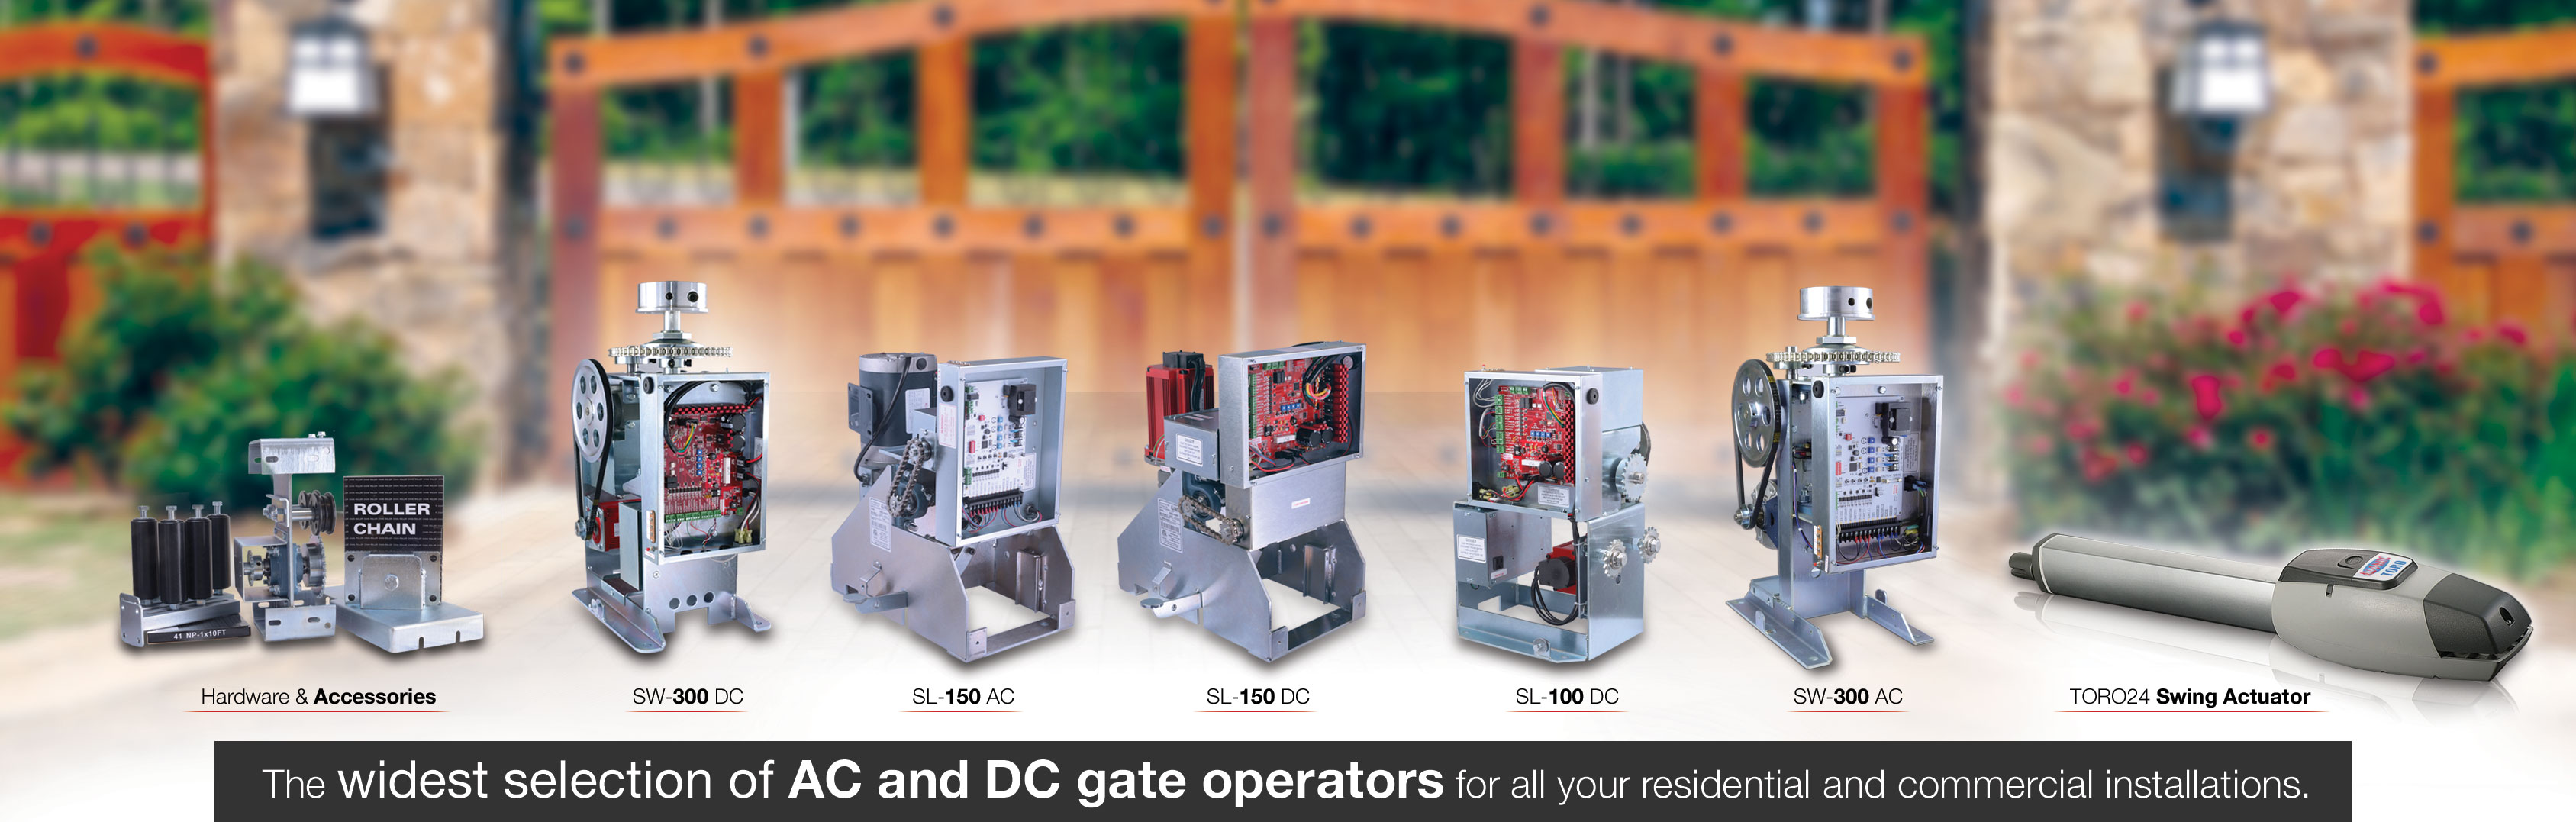 All-O-Matic - The Leader in Gate Operators Video